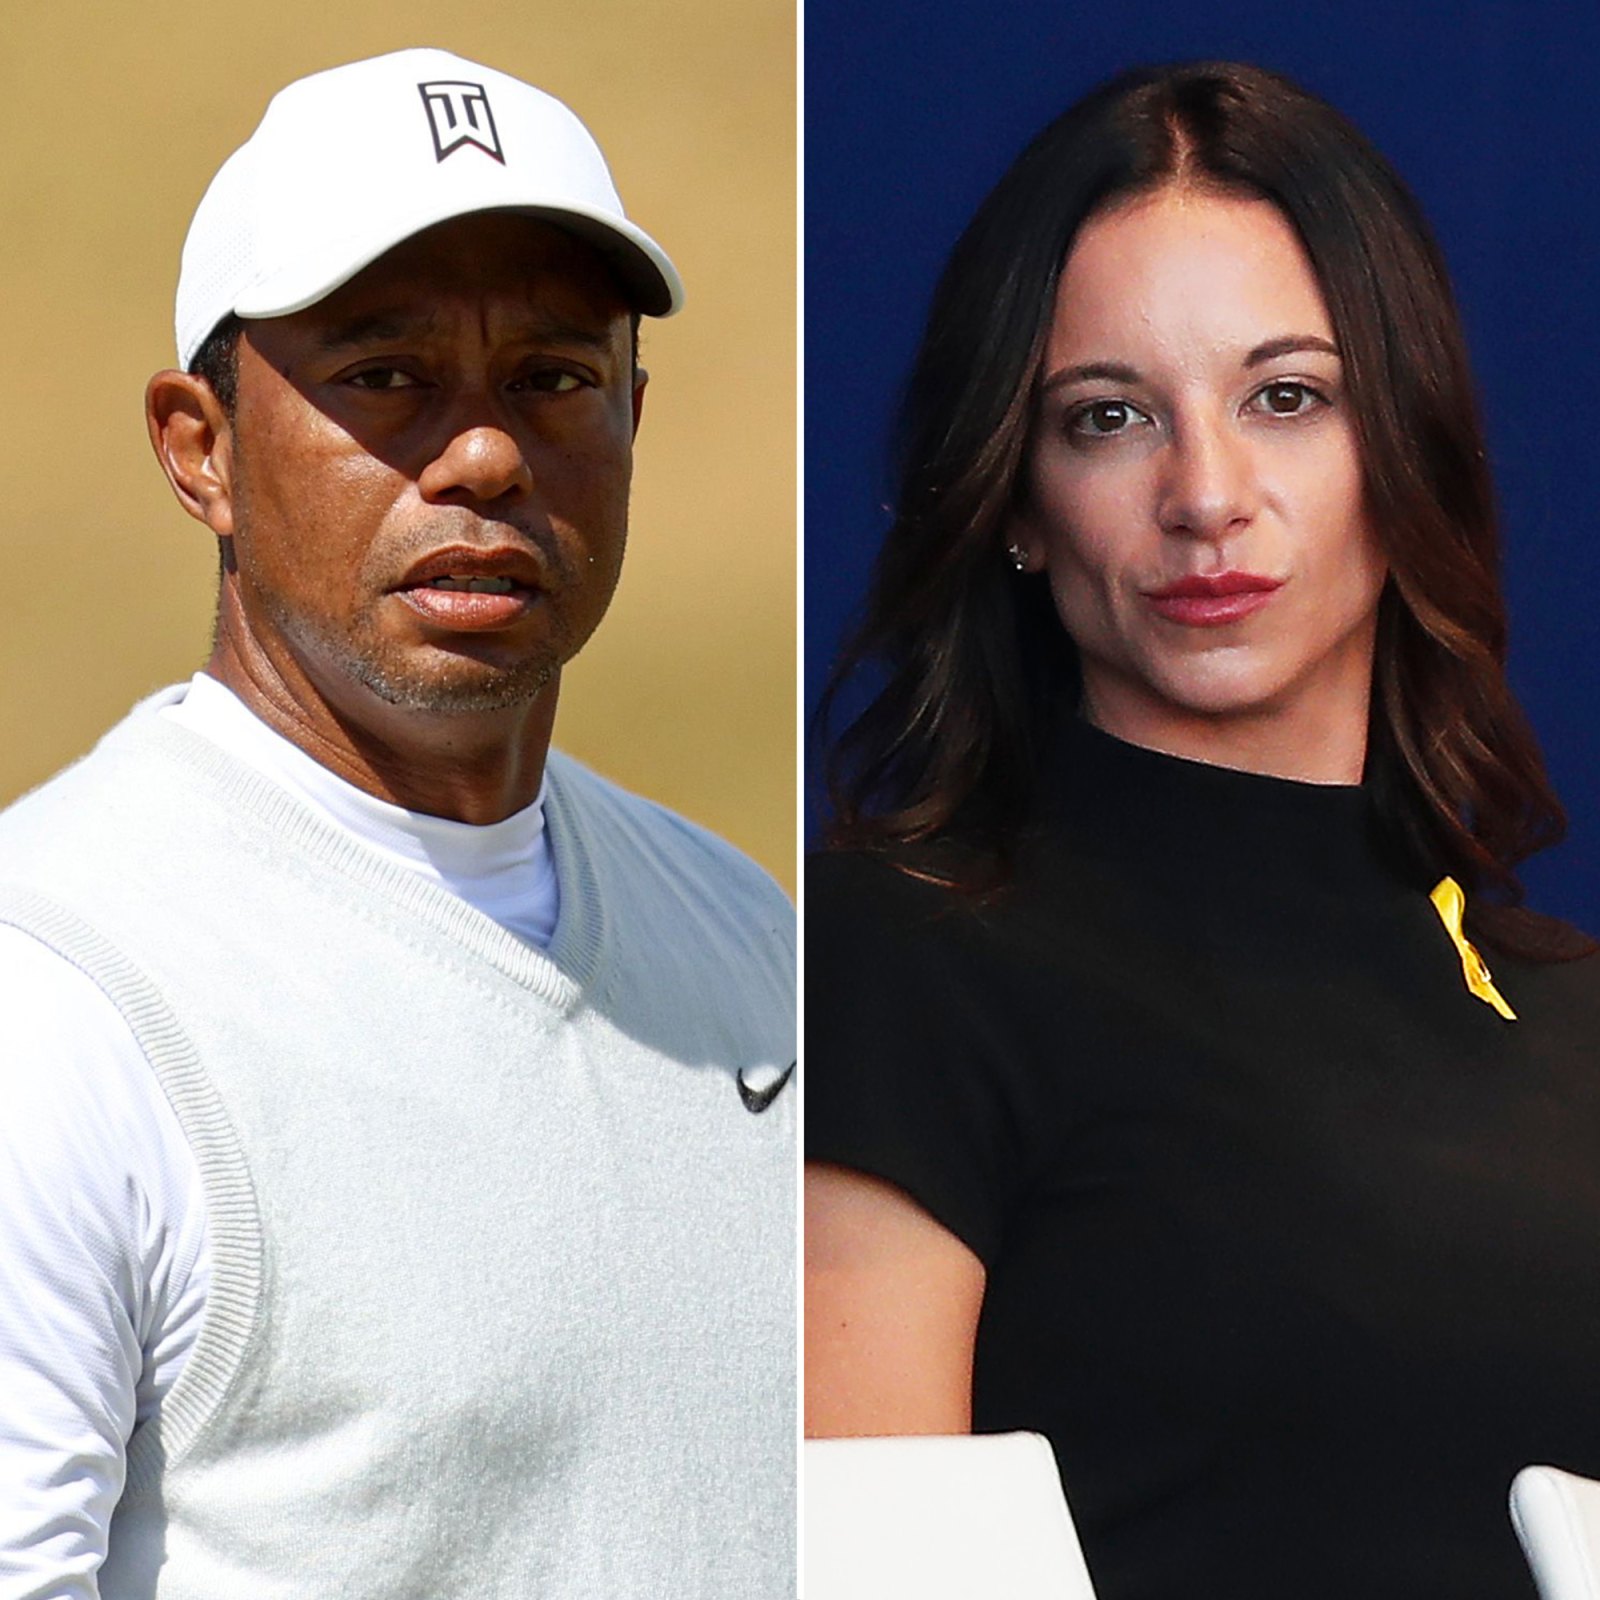 Tiger Woods and Erica Herman’s Messy Split